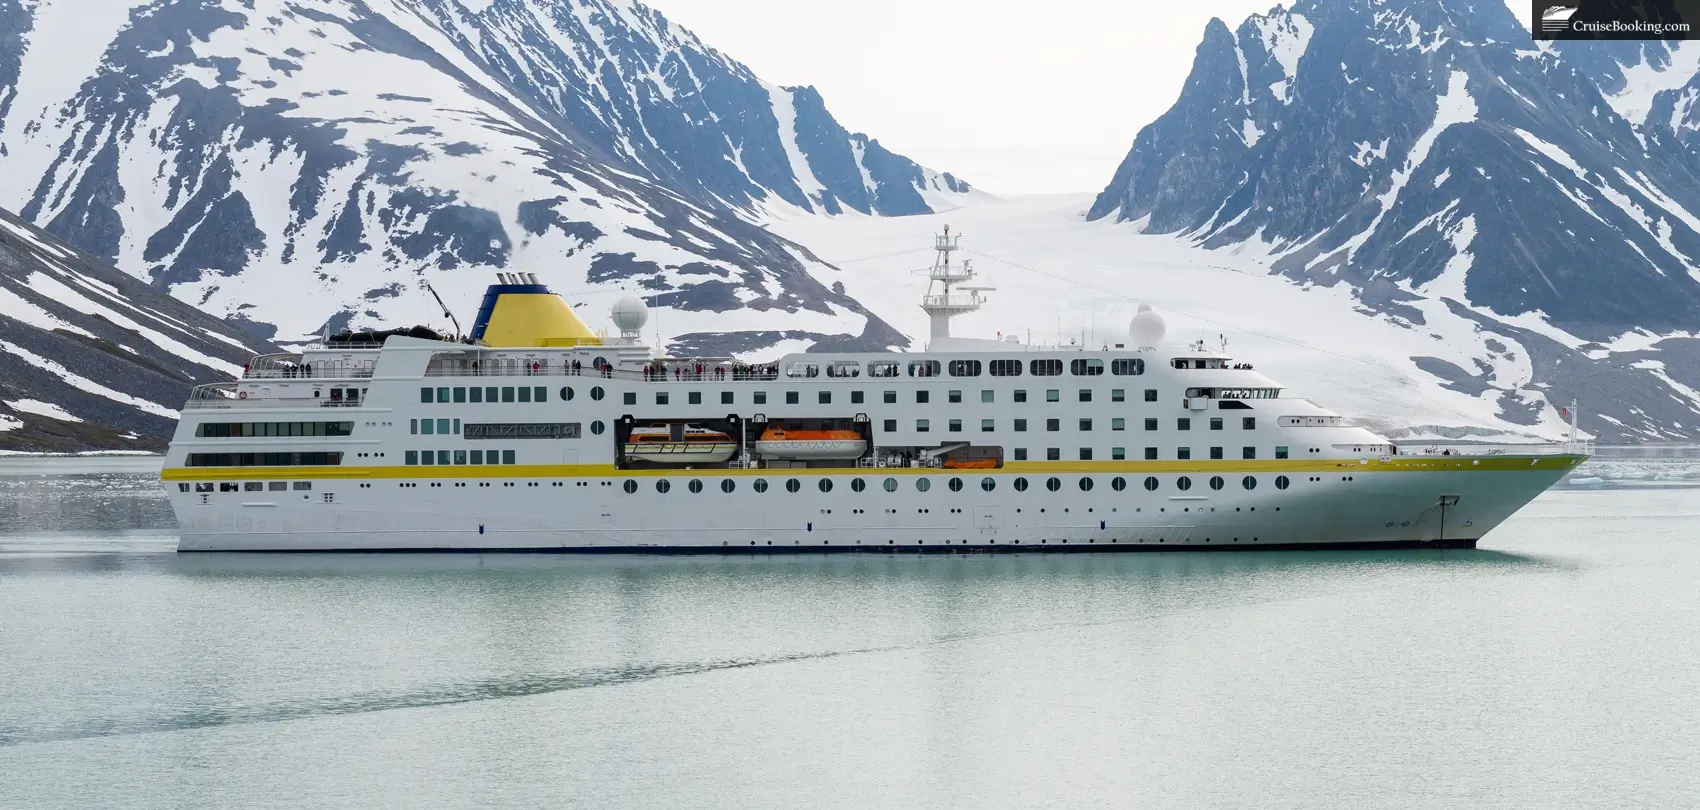 Expedition ship in Arctic sea, Antarctic cruise